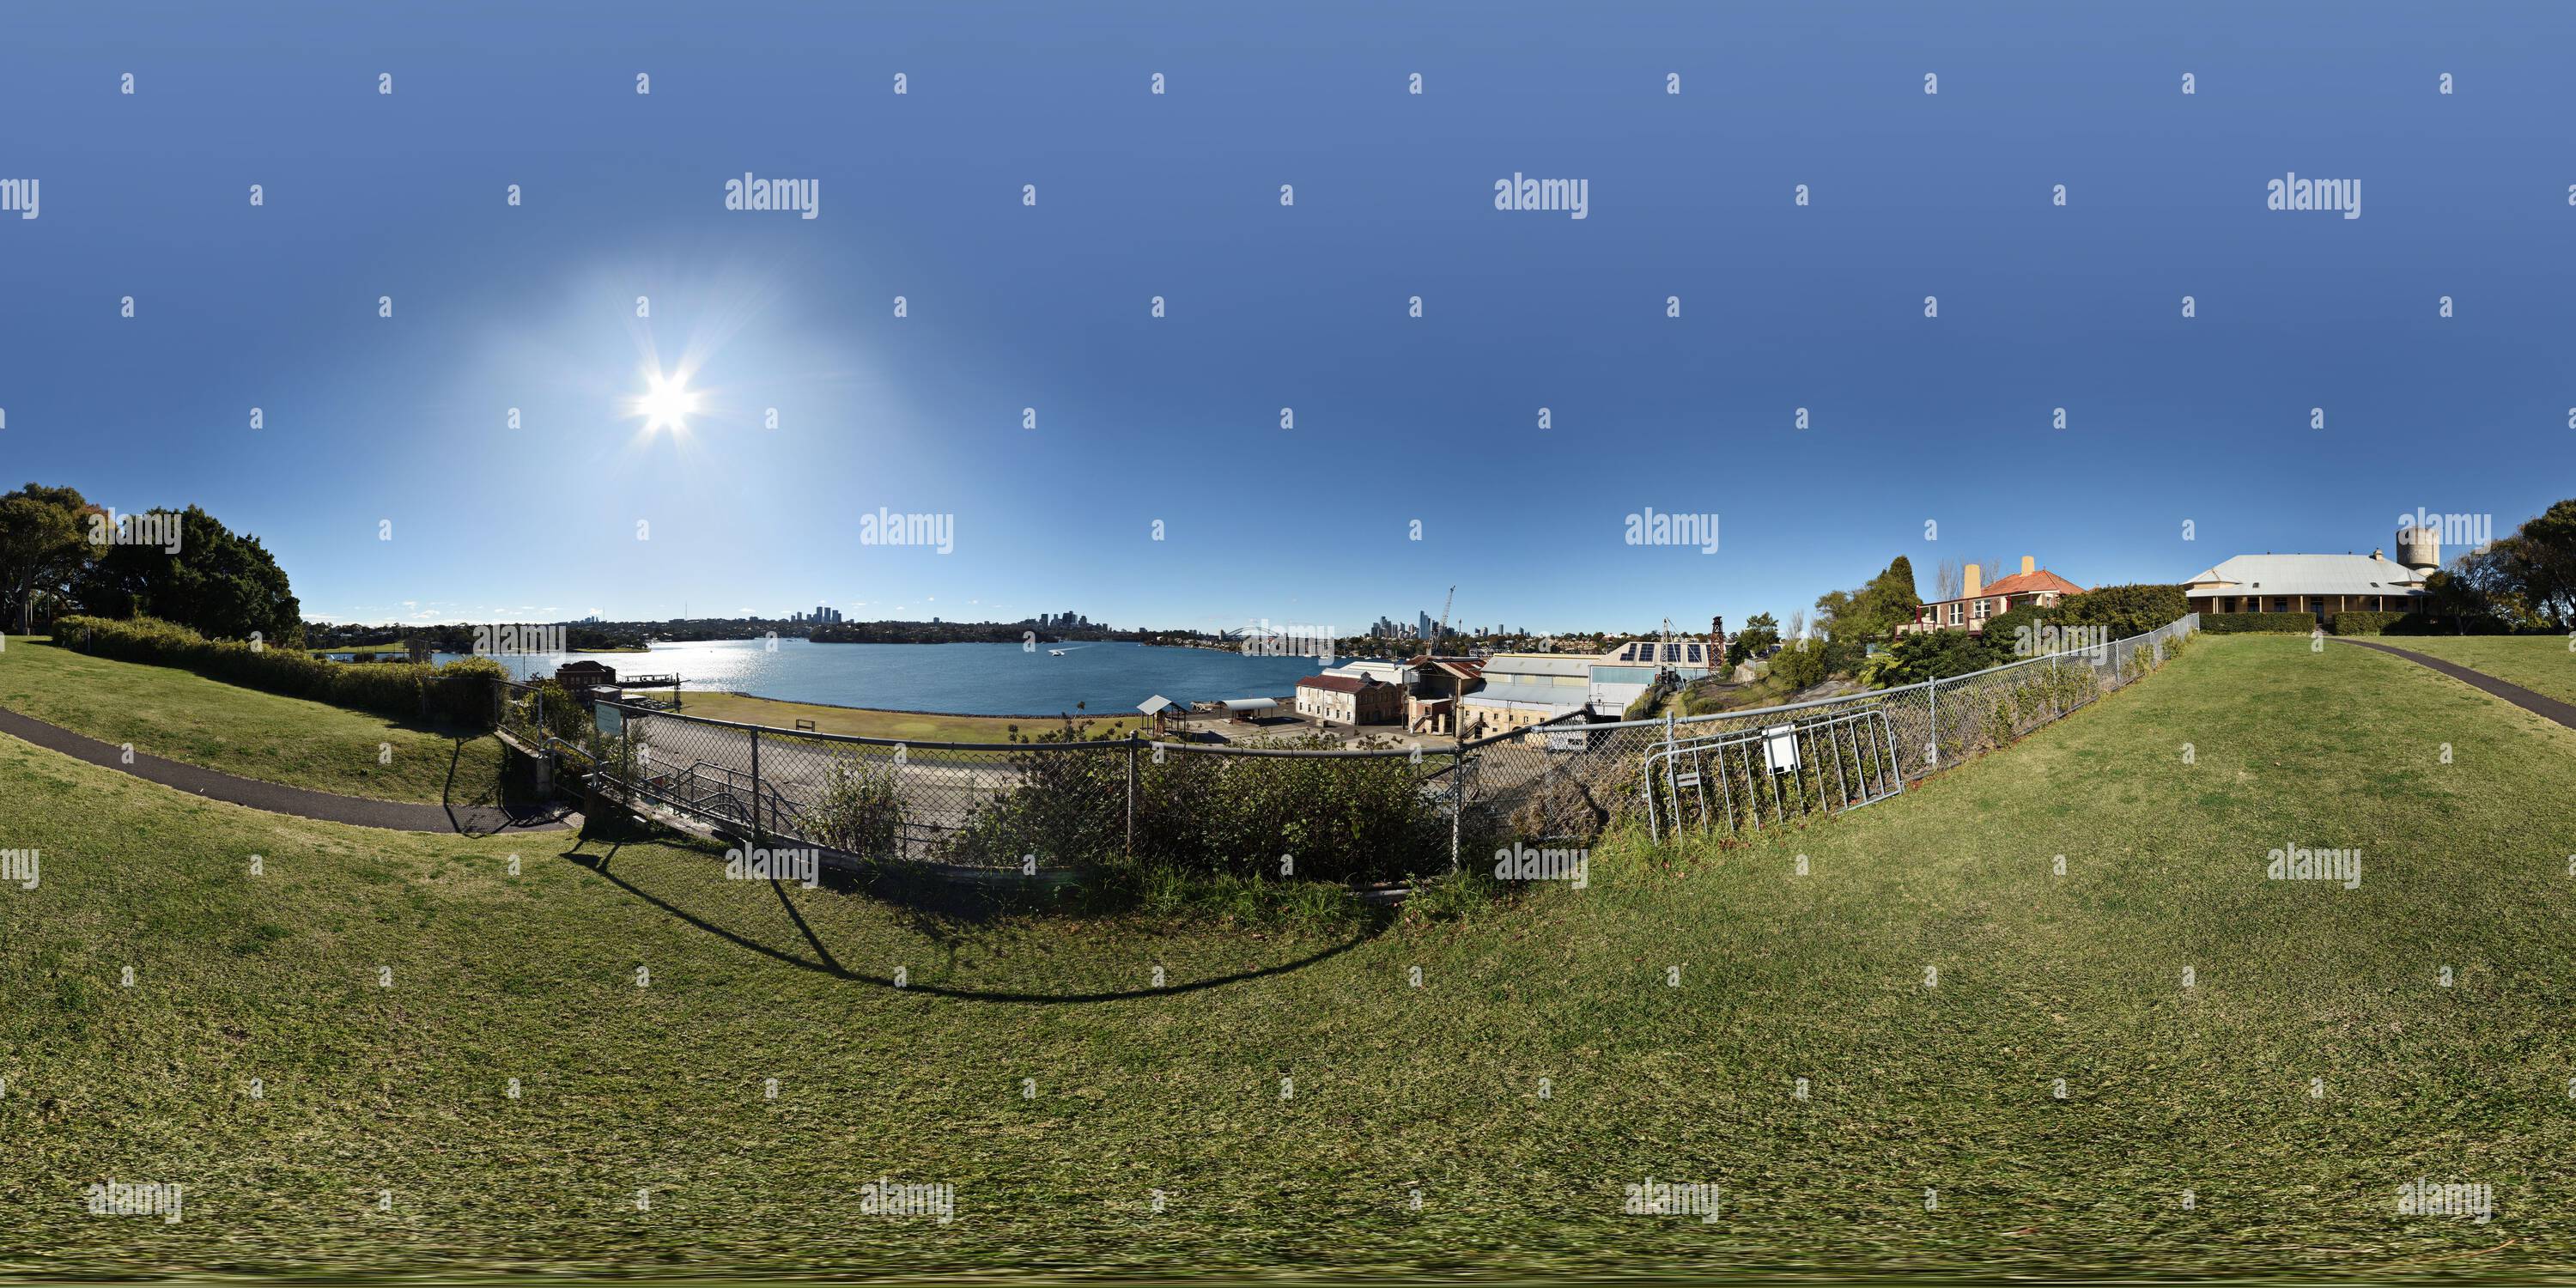 360 degree panoramic view of 360° Panorama Cockatoo Island from Biloela house lawn the Eastern Apron, sweeping views of the Industrial Precinct, North Sydney, the CBD and Balmain